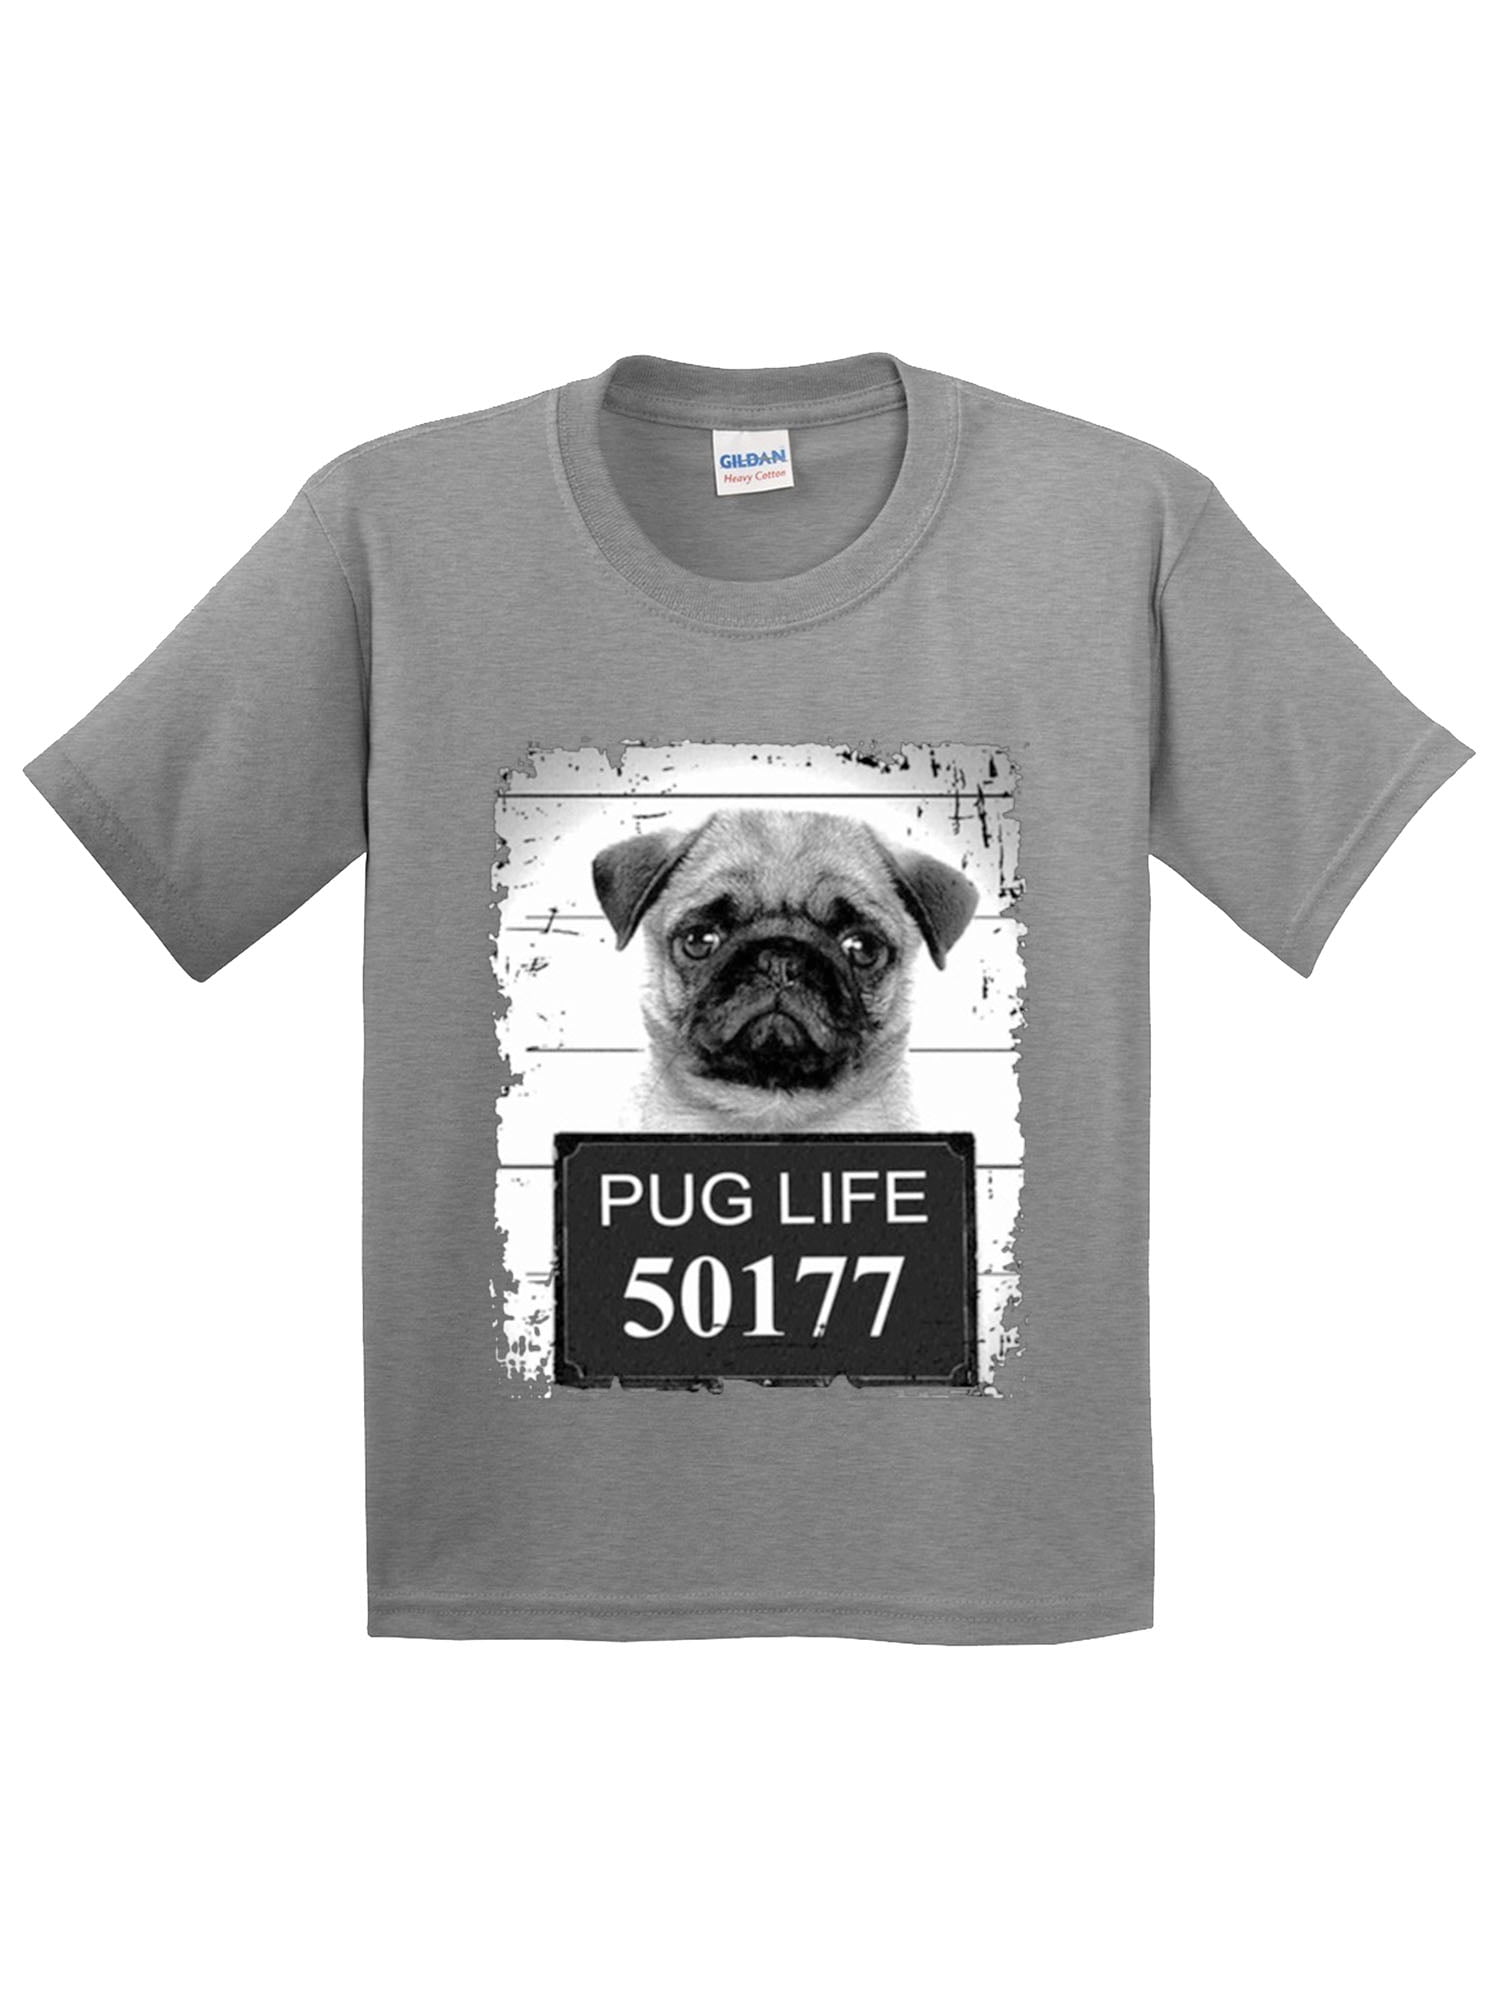 Pug Est 1572 T Shirt Pick Your Size Youth Medium to 6 X Large